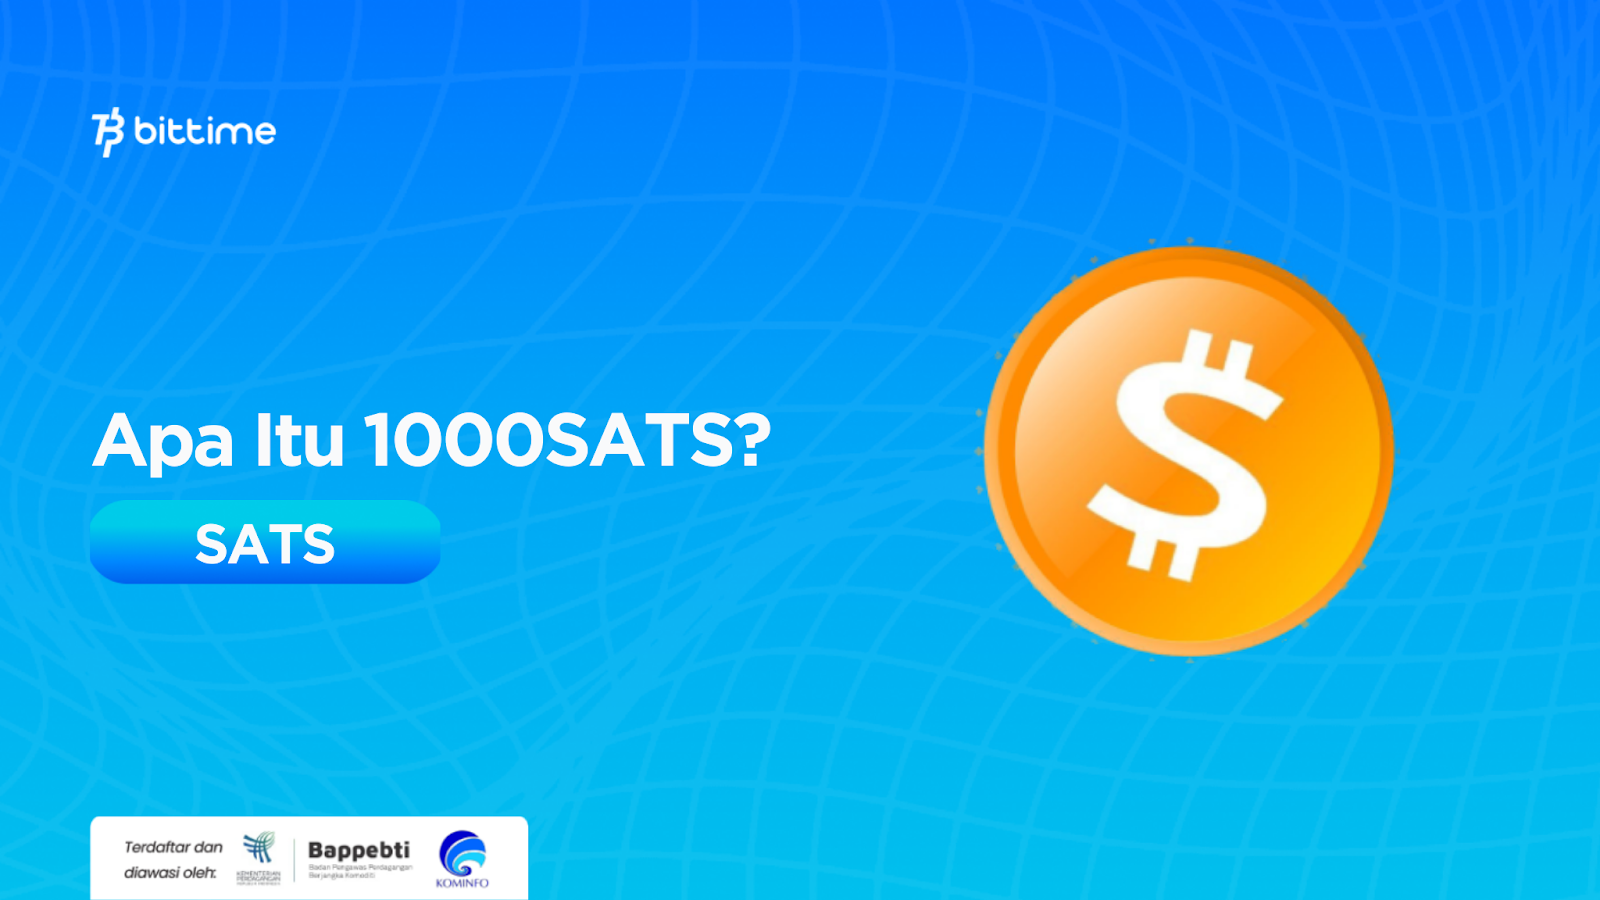 Is 1000 sats a meme coin?